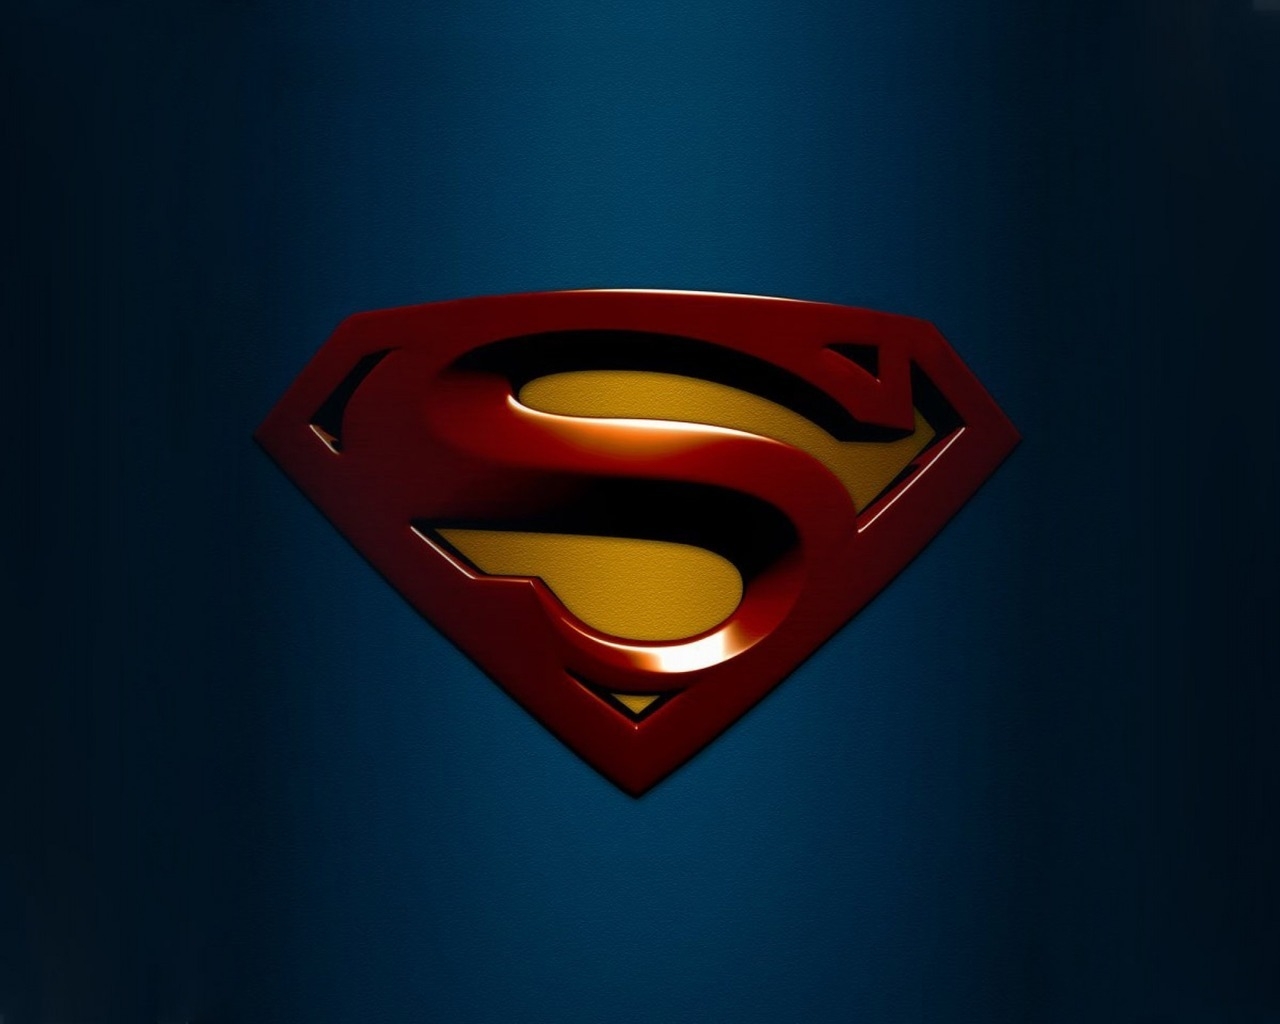 Just Superman for 1280 x 1024 resolution